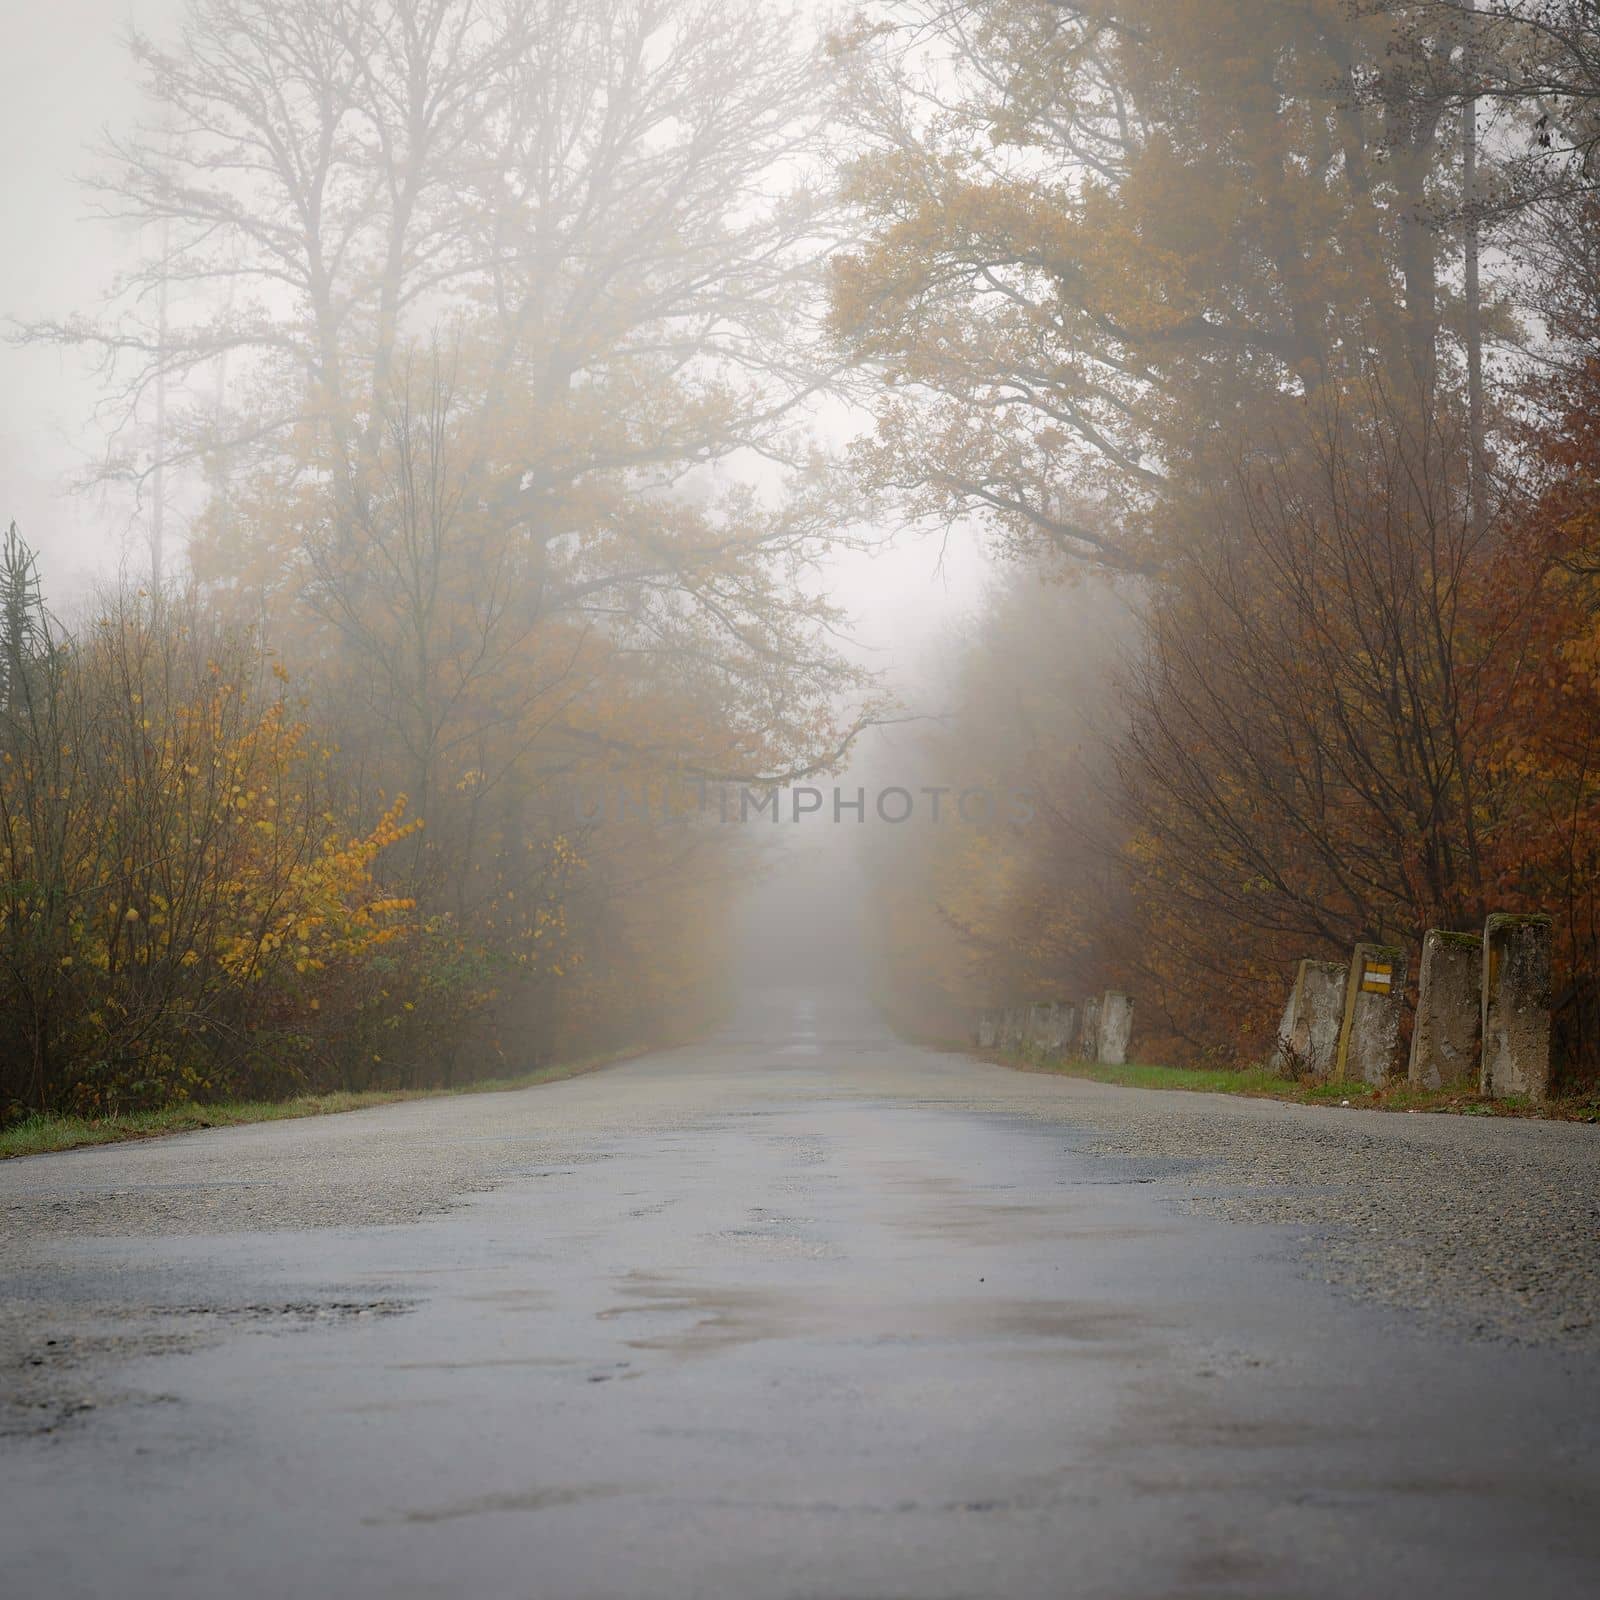 Road in autumn. Foggy and dangerous car driving in the winter season. Bad weather with rain and traffic on the road. Concept for traffic and road safety. by Montypeter